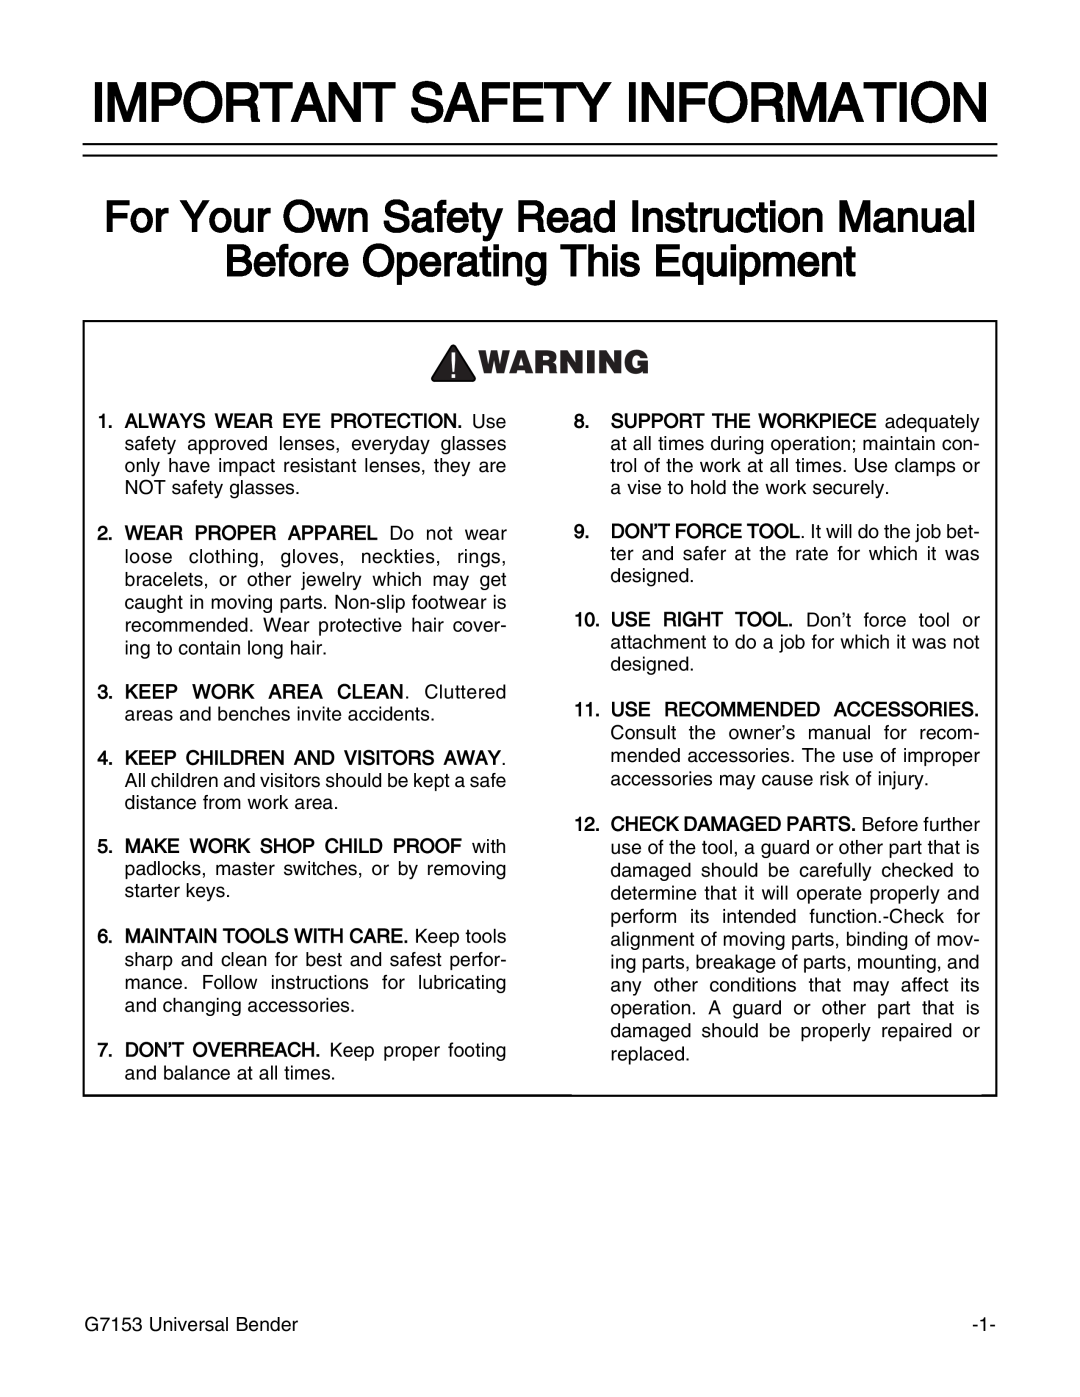 Grizzly G7153 manual Important Safety Information, Before Operating This Equipment 